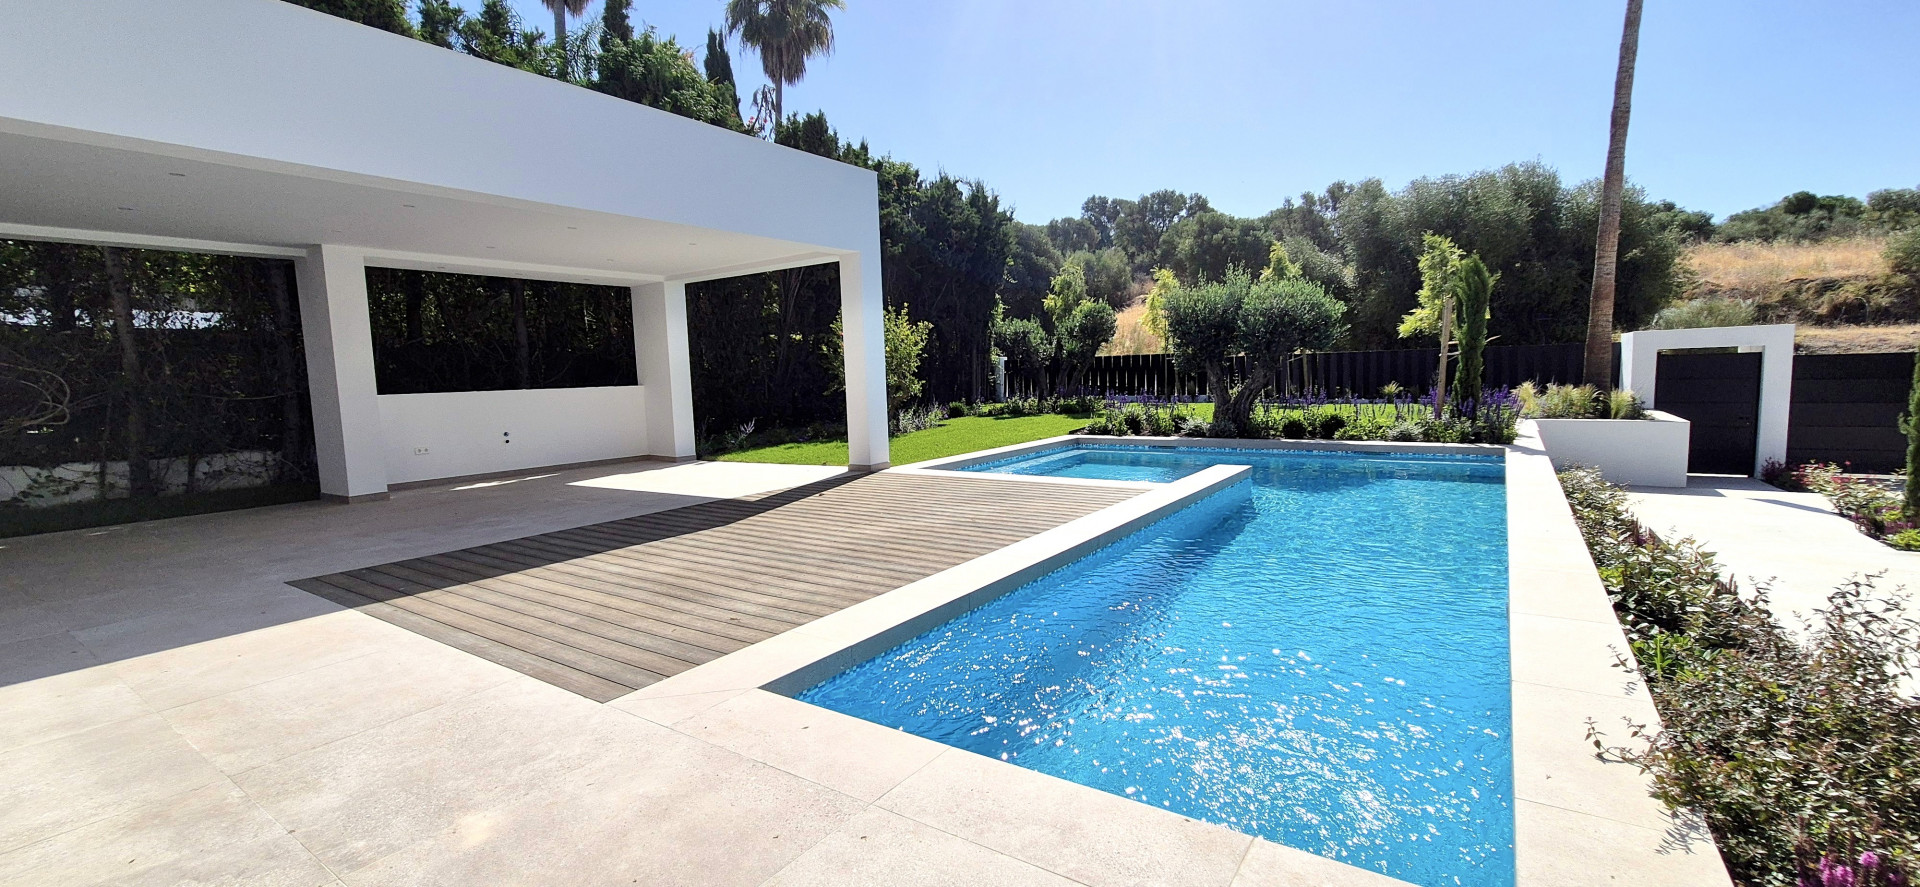 Beautiful newly built property located in Paraiso Alto, a privileged area surrounded by the best golf courses in Costa del Sol